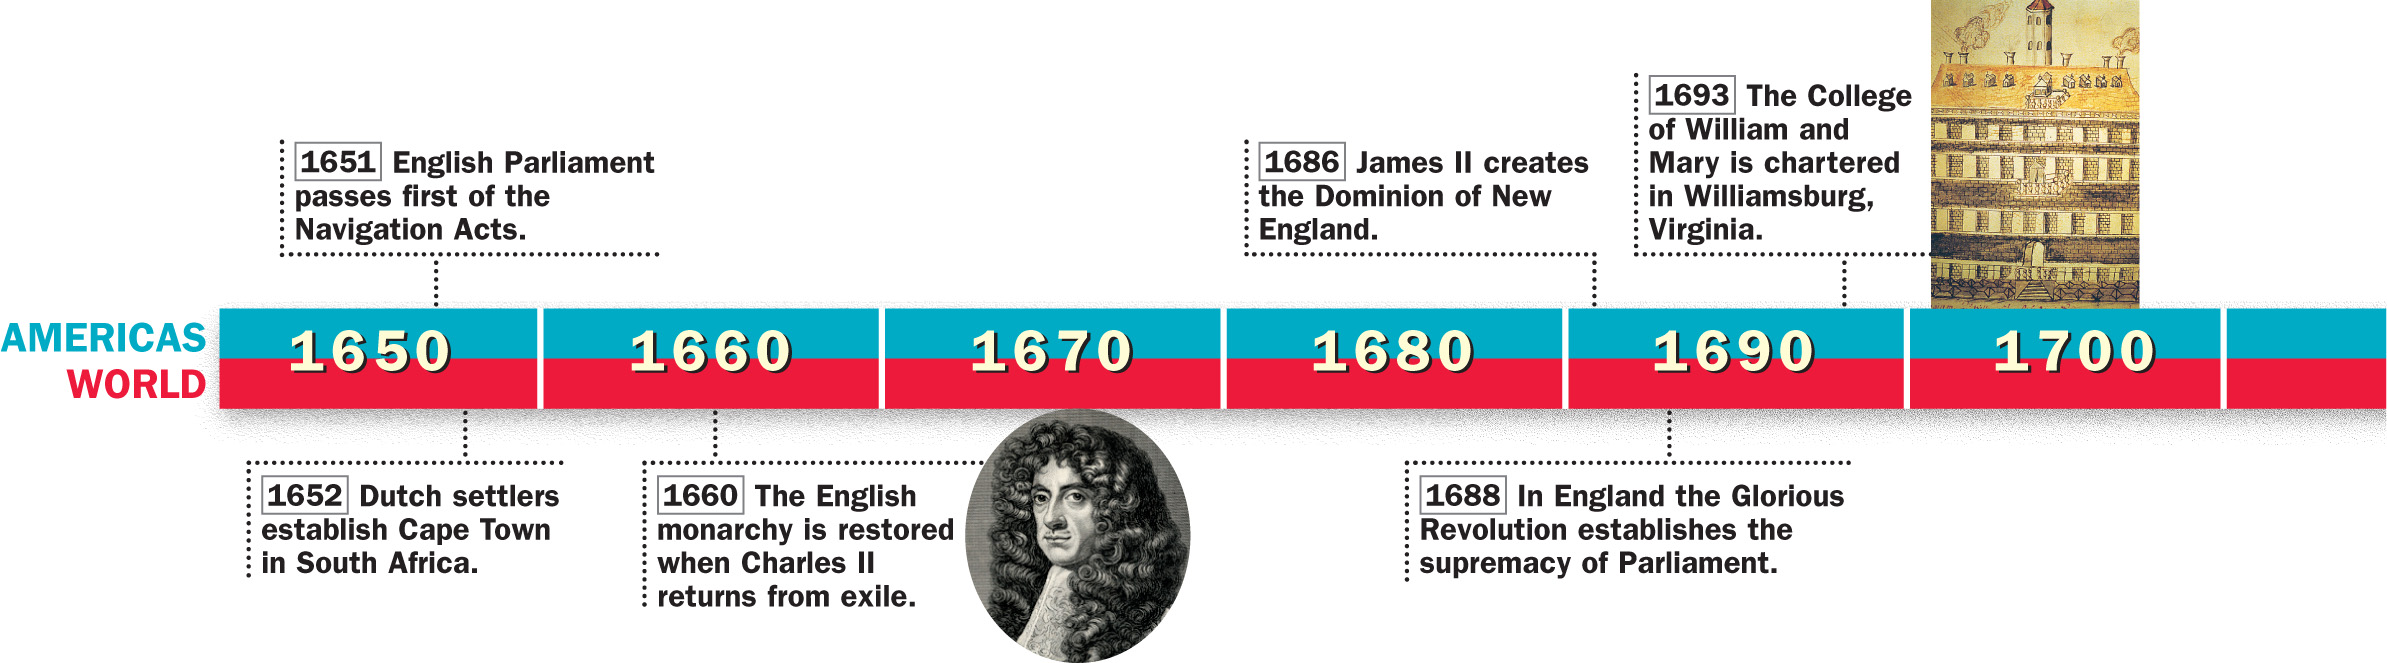 A timeline of historical events from 1650 to 1760 in both the Americas and the world